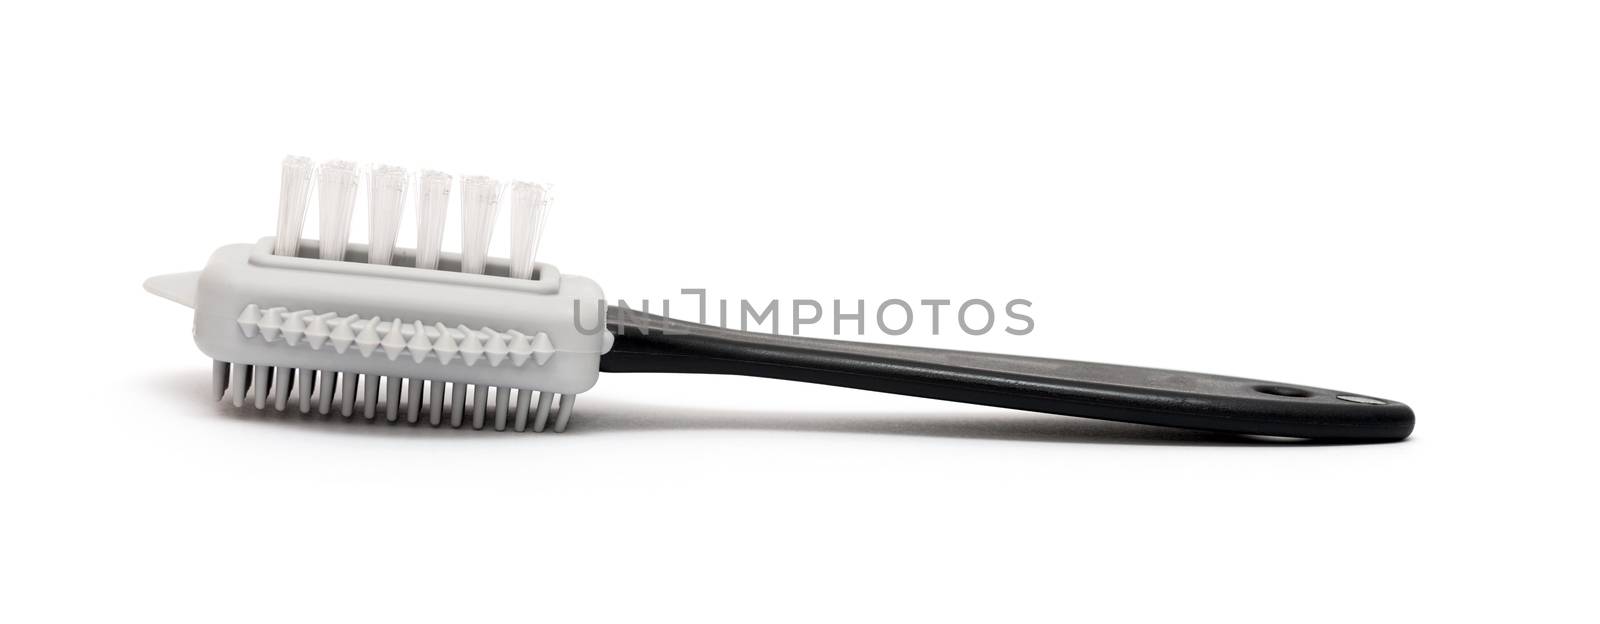 Cloth or shoe cleaning brush isolated over the white background by DNKSTUDIO